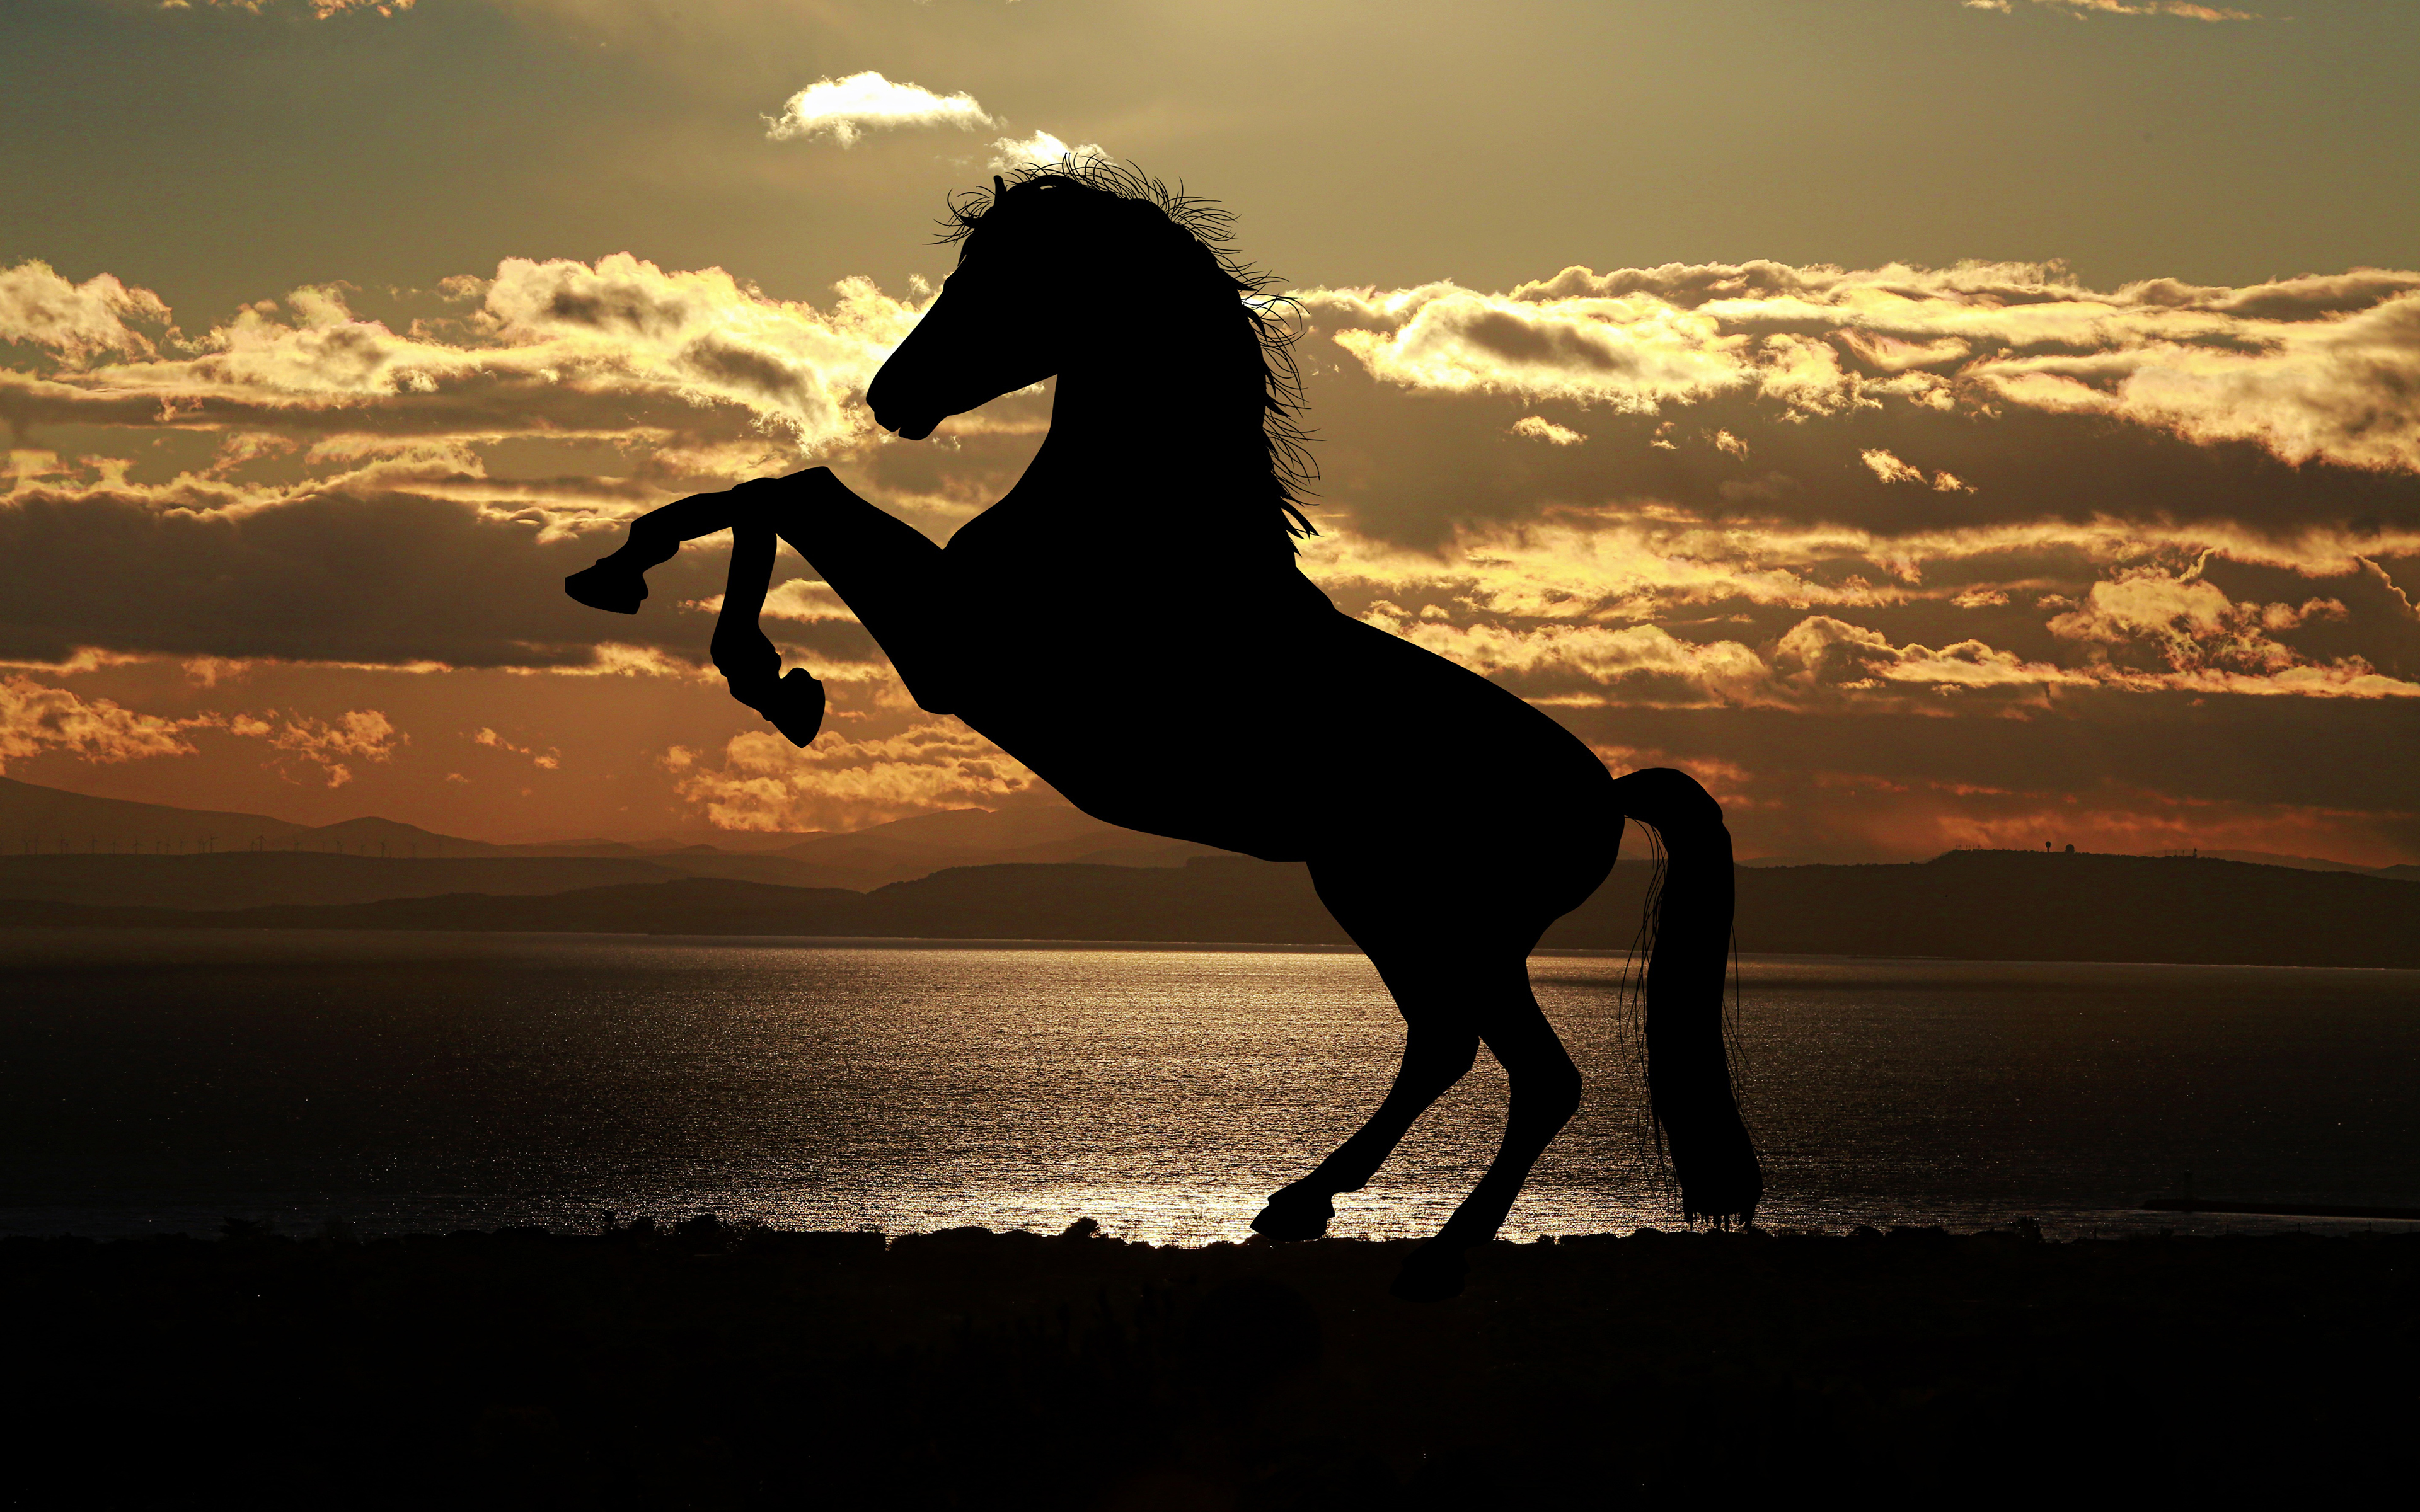 Horse Silhouette at Sunset 4K54502885